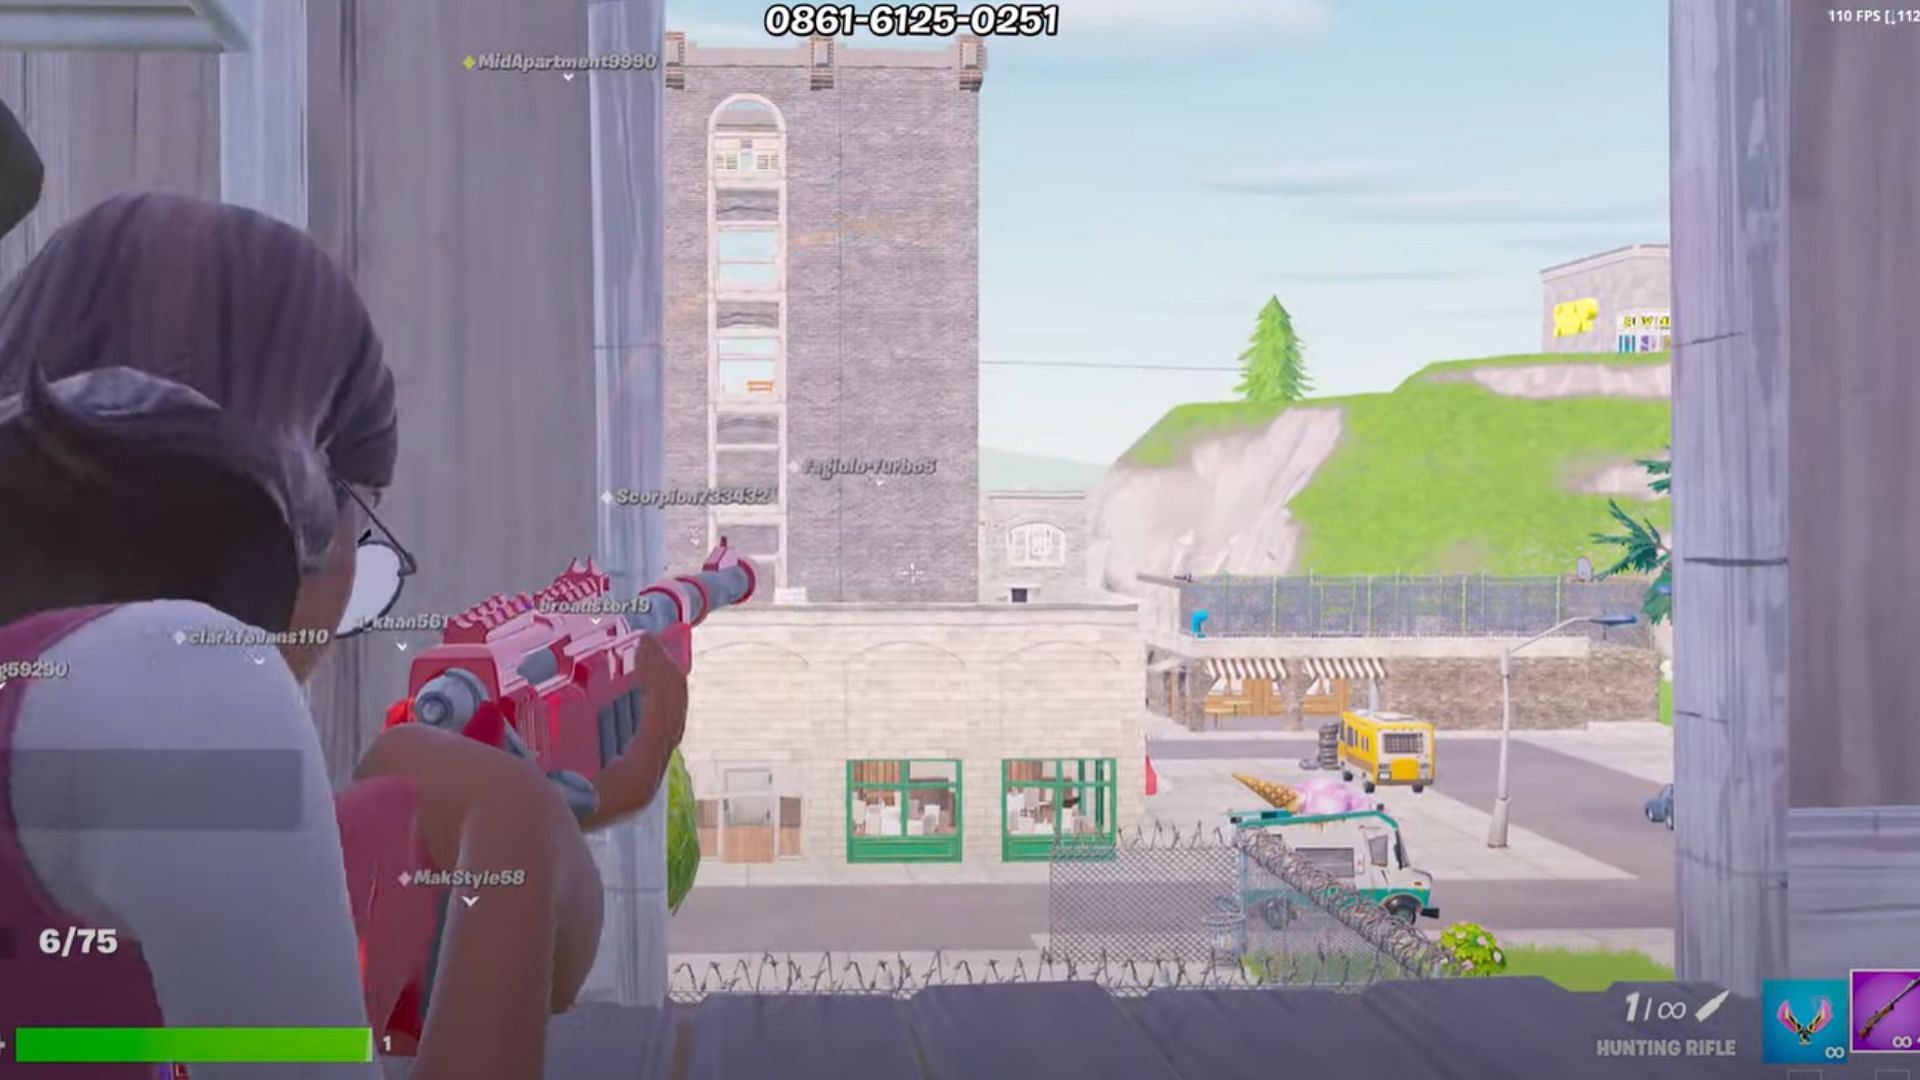 Players can engage in intense sniper battles in Ranked One Shot Tilted (Image via MBT on YouTube)